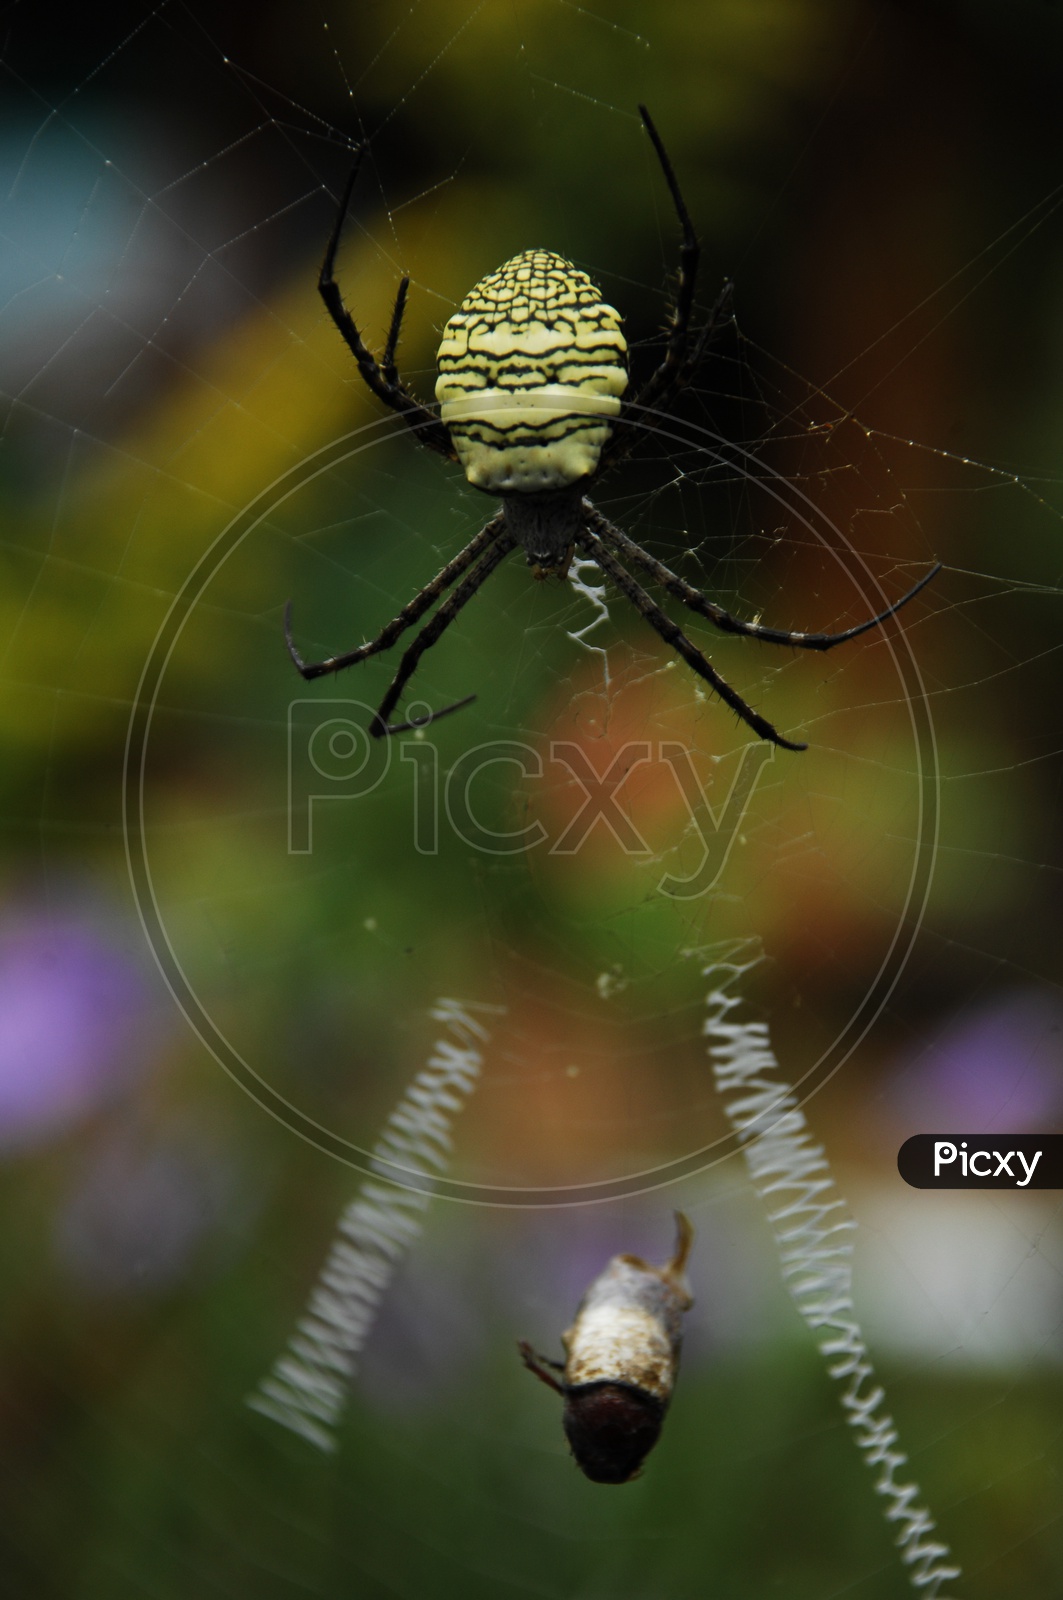 A Spider catching its prey in a web